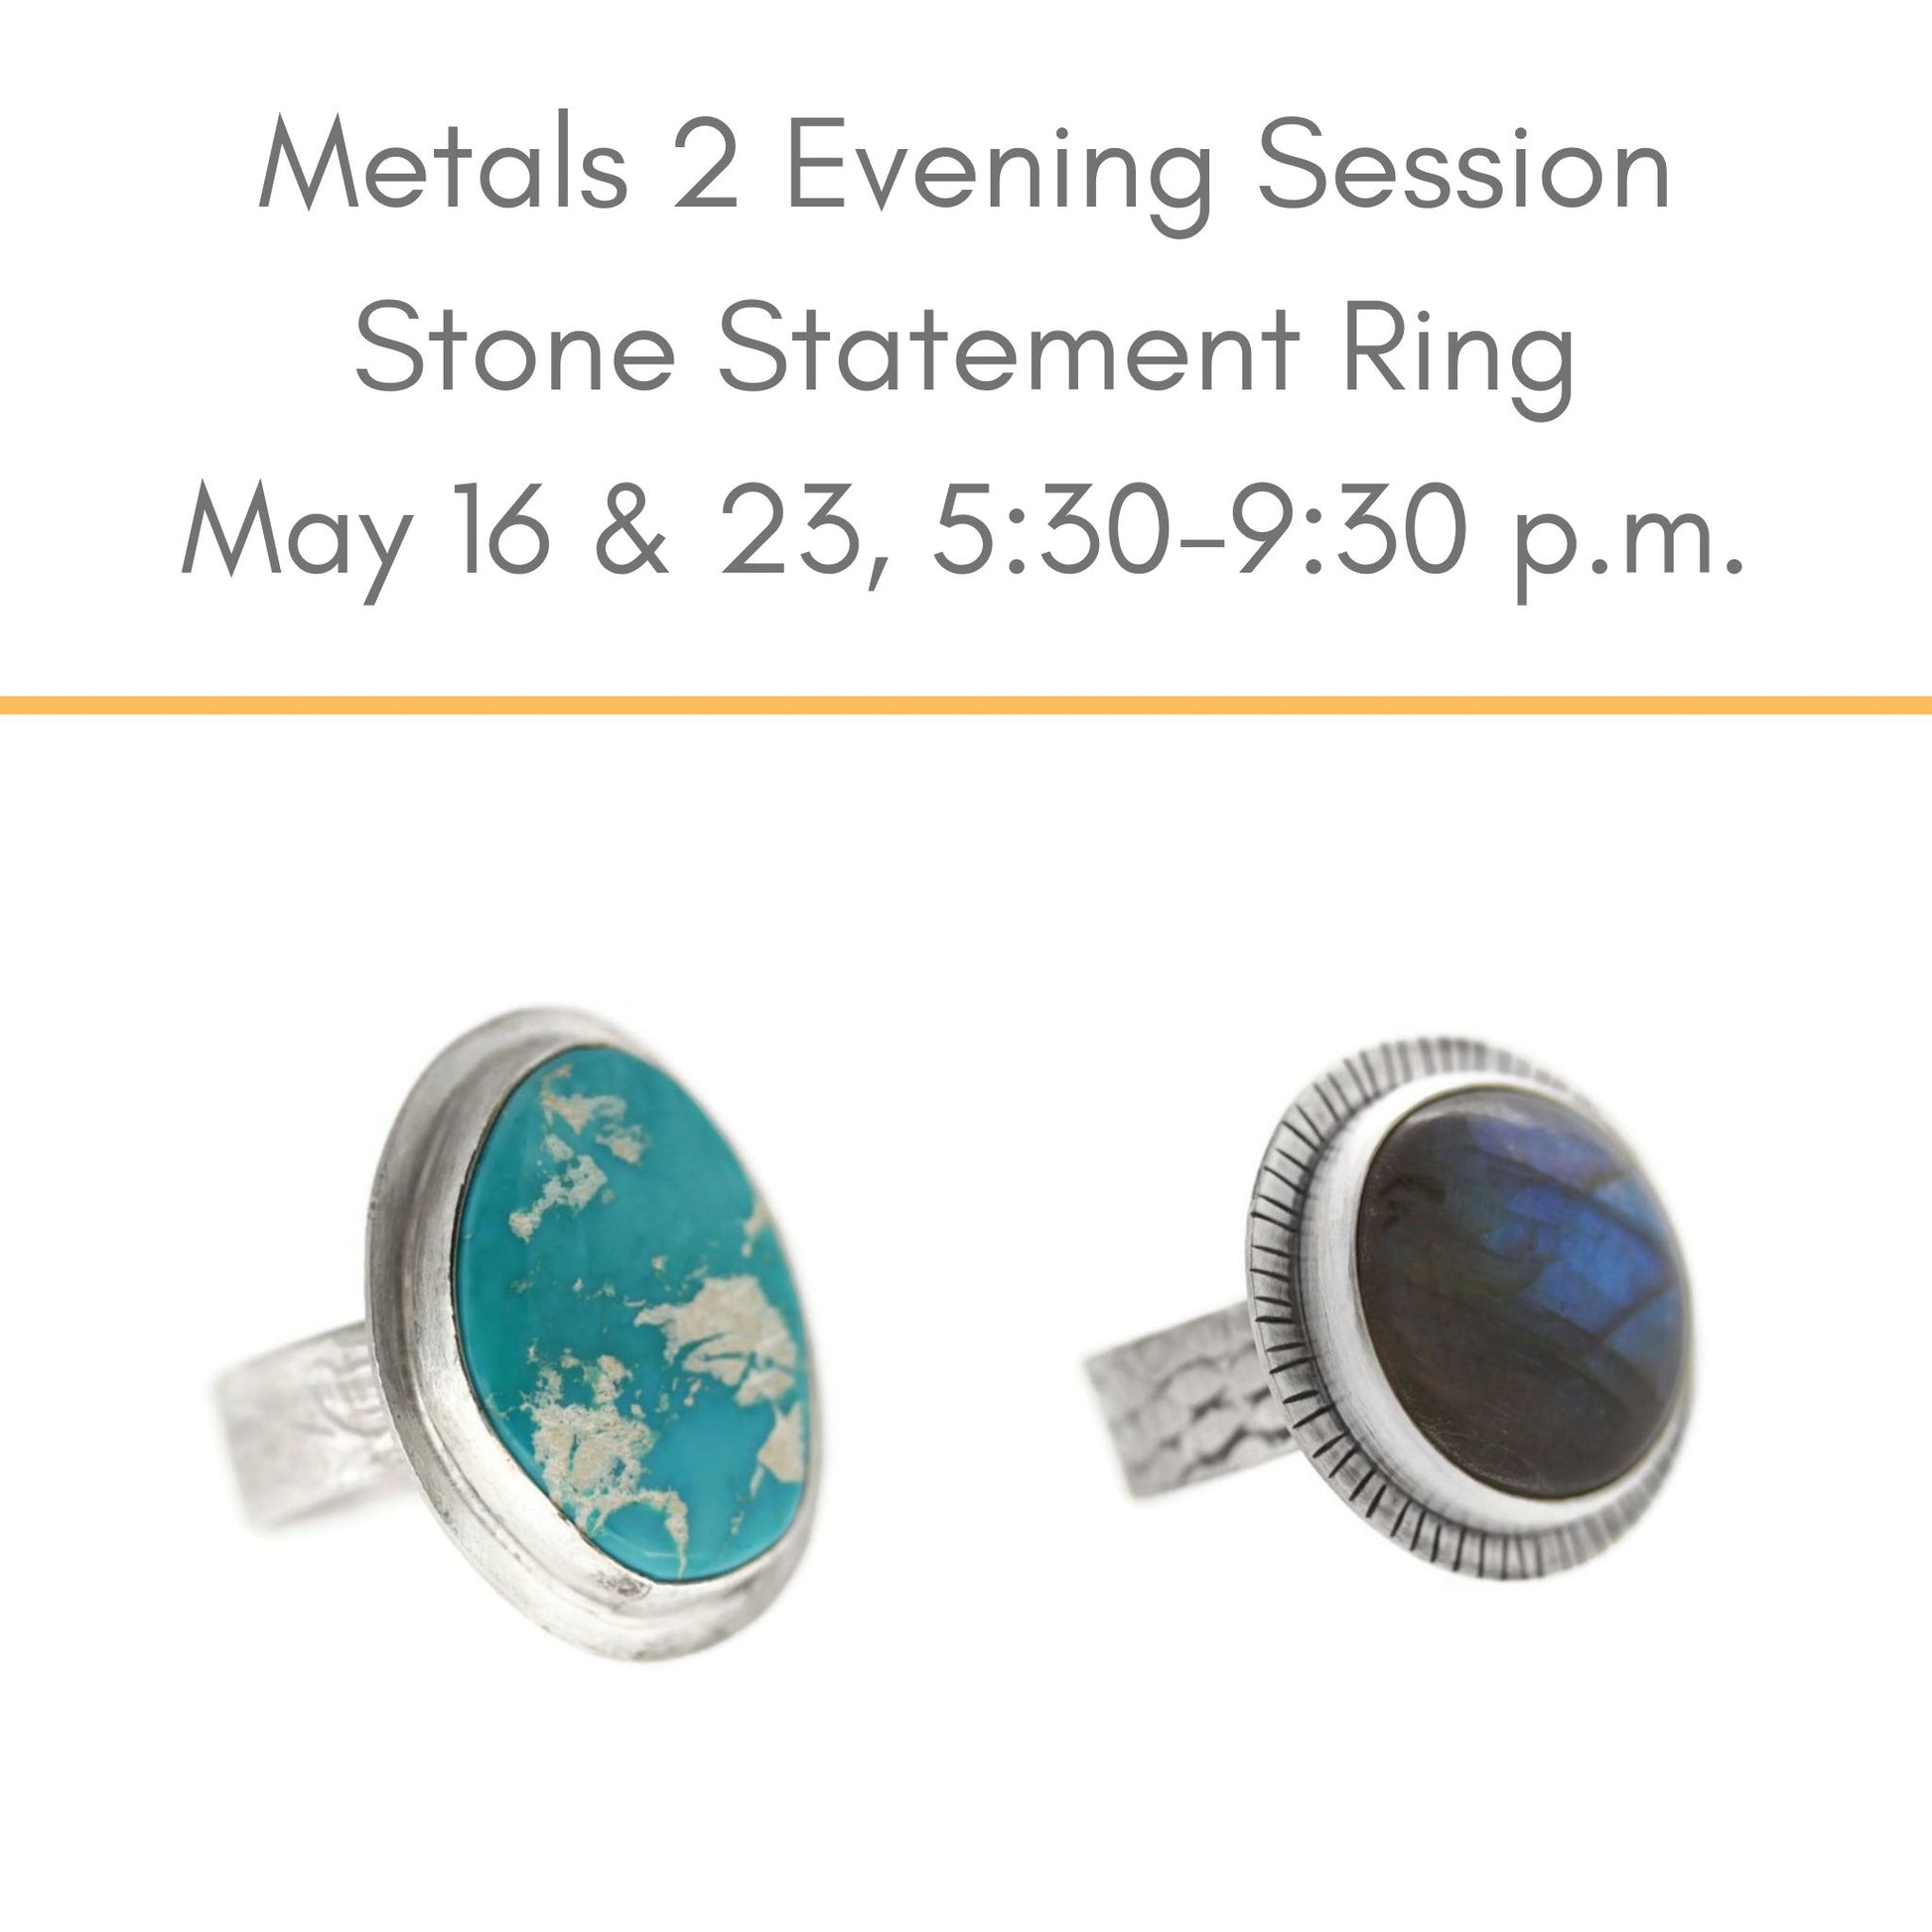 Mets 2 Stone ring jewelry class May evening session